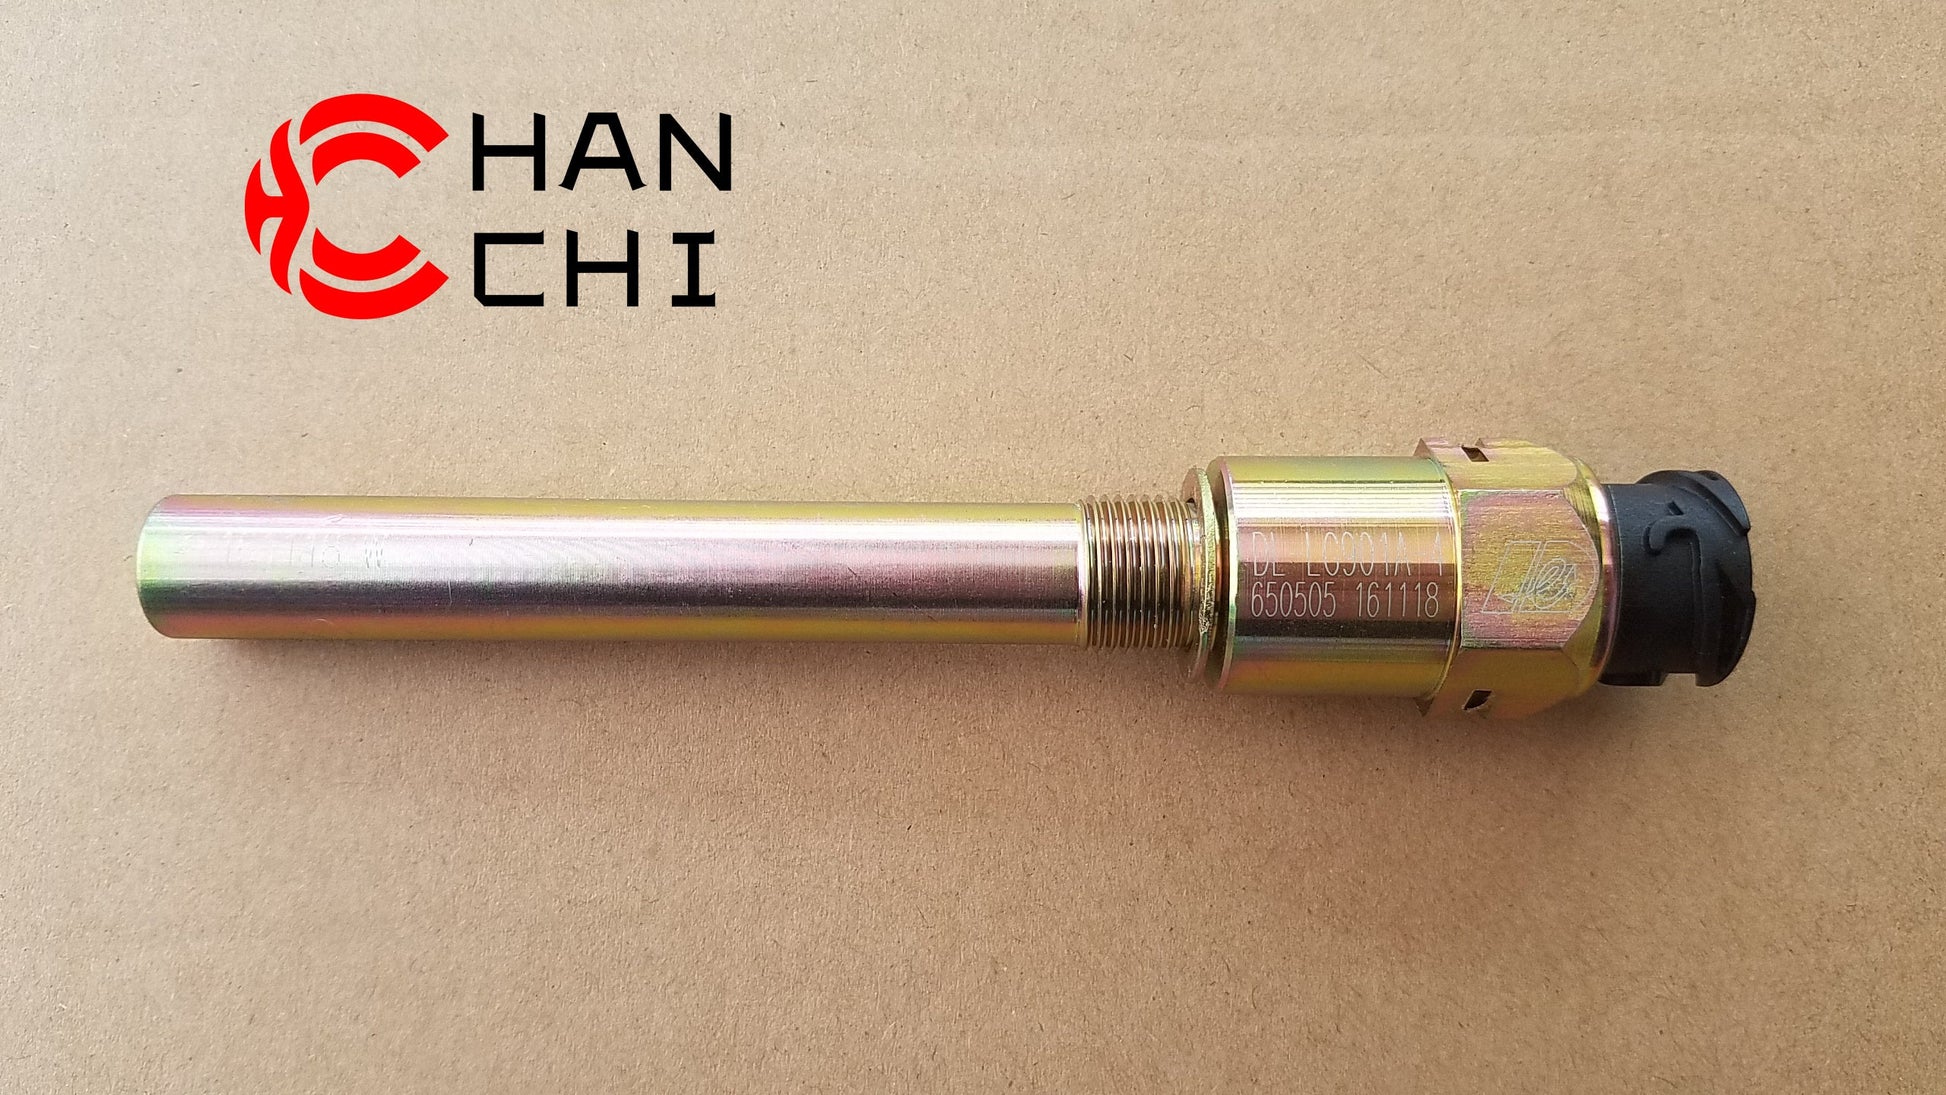 【Description】---☀Welcome to HANCHI☀---✔Good Quality✔Generally Applicability✔Competitive PriceEnjoy your shopping time↖（^ω^）↗【Features】Brand-New with High Quality for the Aftermarket.Totally mathced your need.**Stable Quality**High Precision**Easy Installation**【Specification】OEM: LG901A-4 Speed Meter SensorMaterial: metalColor: GOLDENOrigin: Made in ChinaWeight: 100g【Packing List】1* Speed Sensor 【More Service】 We can provide OEM service We can Be your one-step solution for Auto Parts We can prov